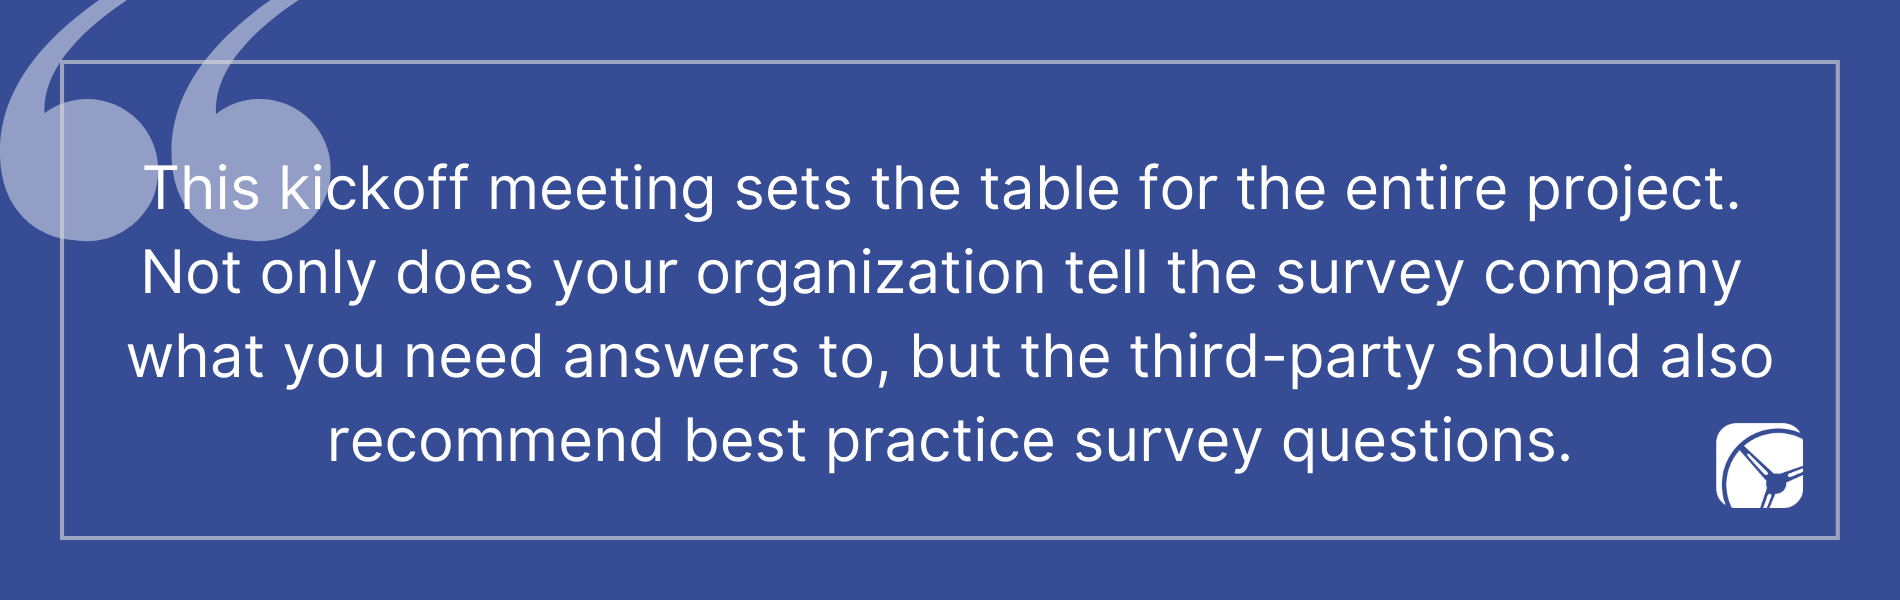 This kickoff meeting sets the table for the entire project.  Not only does your organization tell the survey company  what you need answers to, but the third-party should also recommend best practice survey questions.